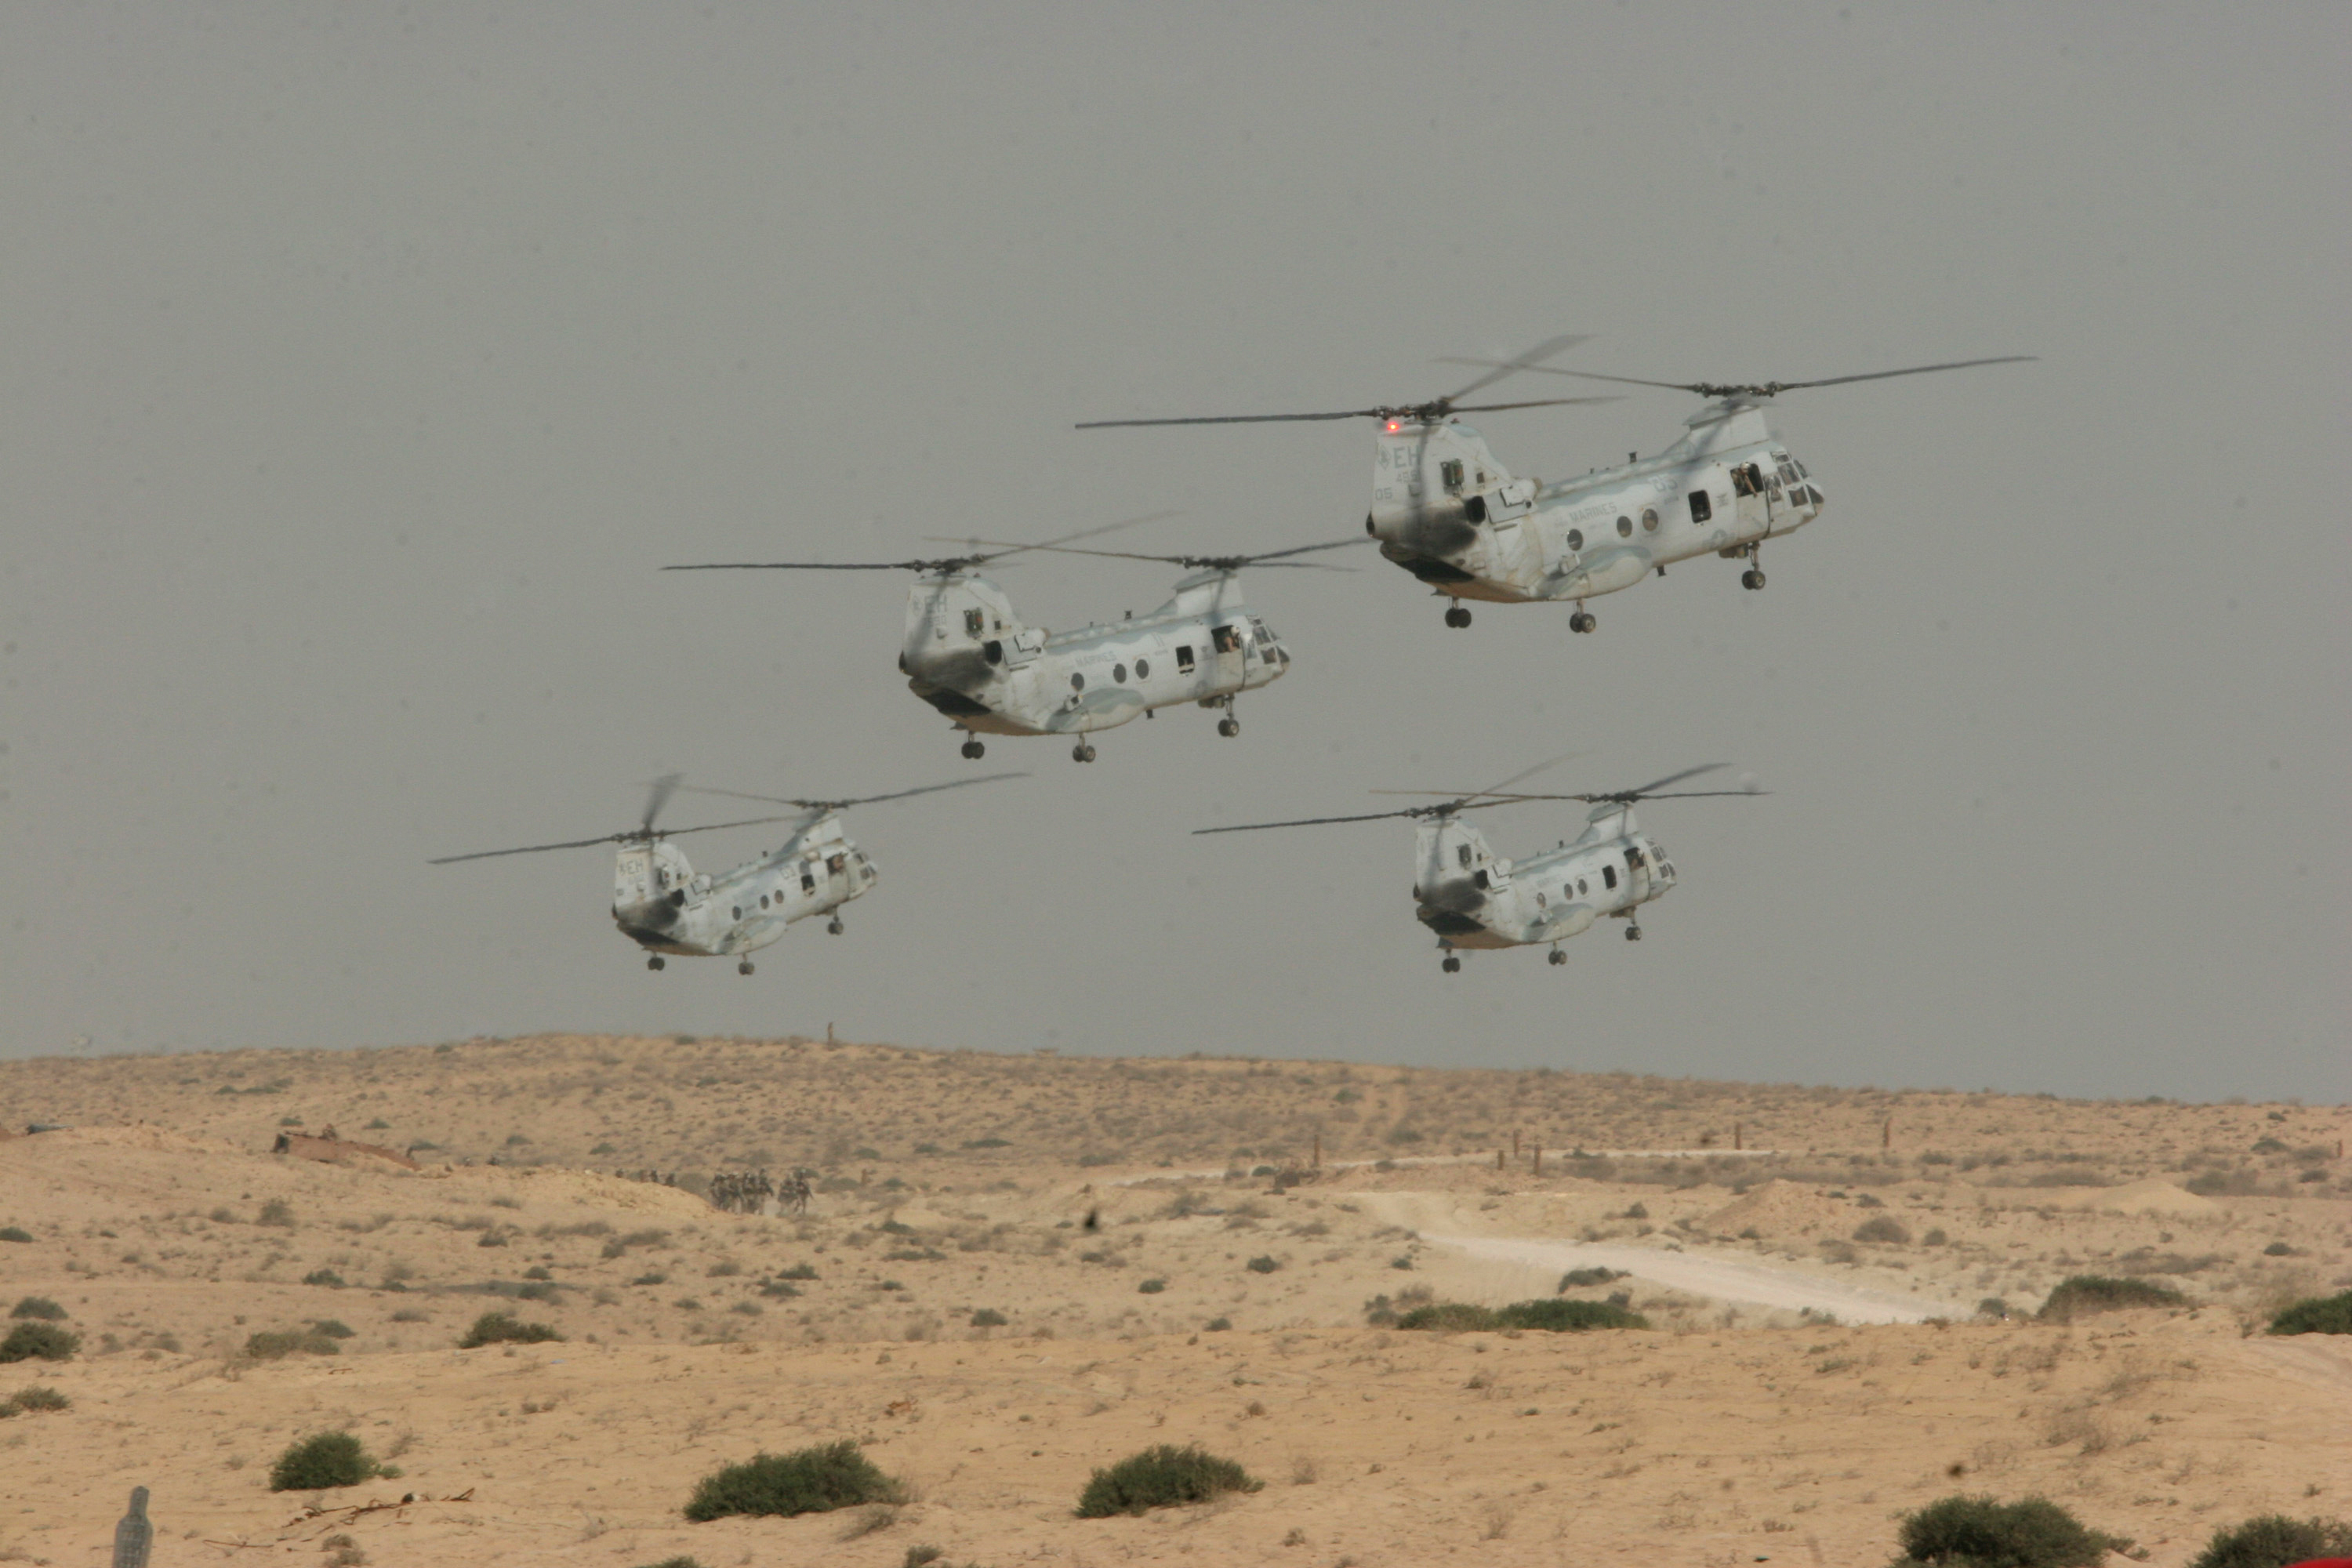 Knights last ride: CH-46 helicopters return from their final East